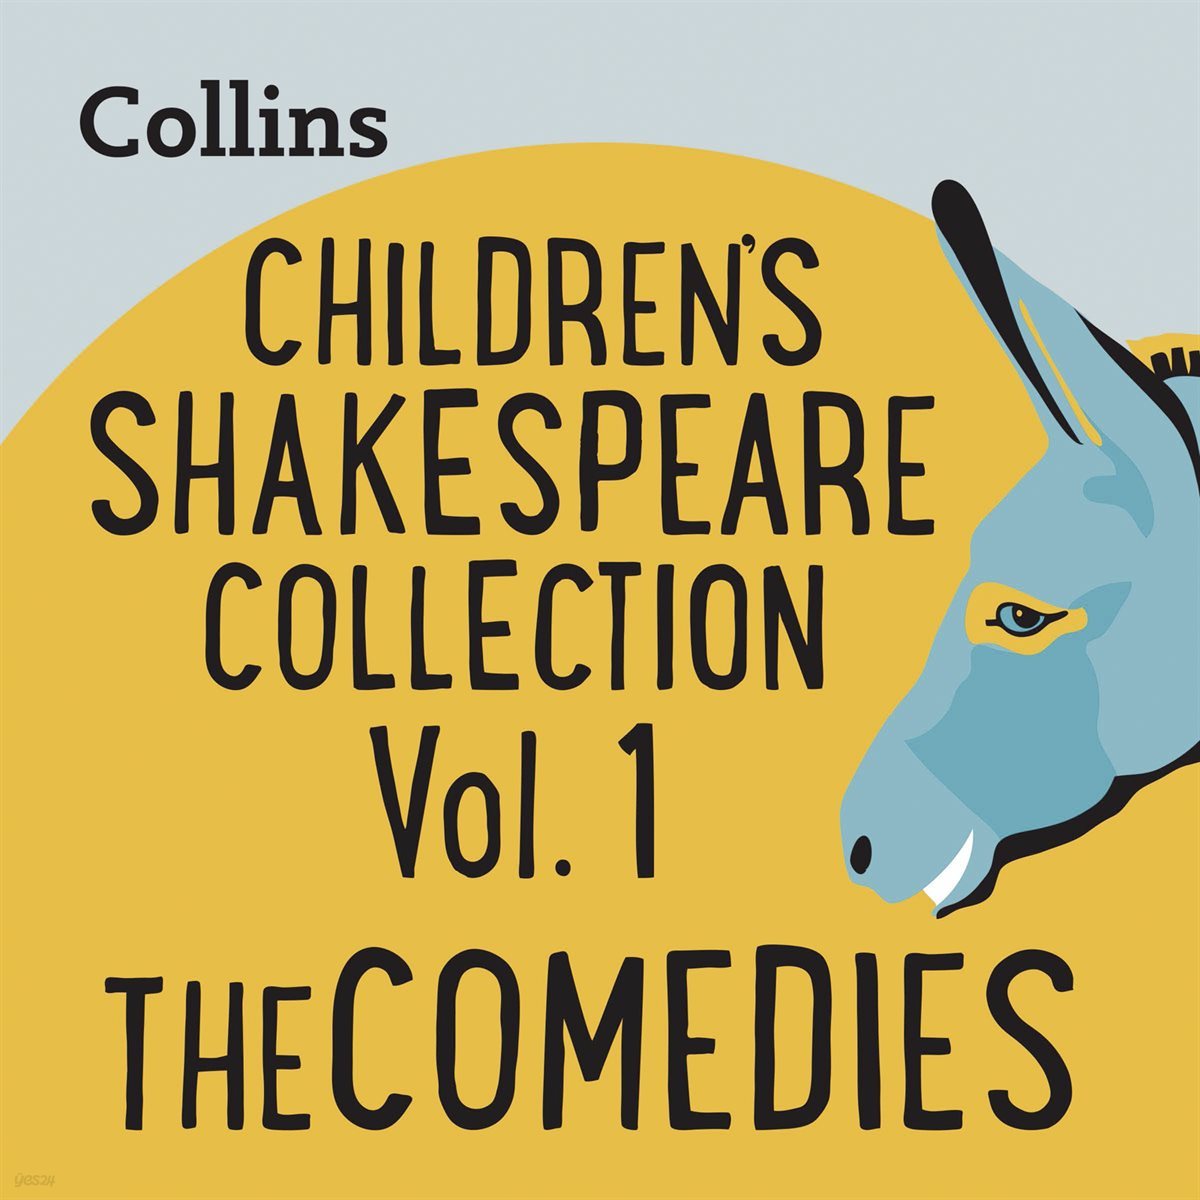 [UK Eng] CHILDREN’S SHAKESPEARE COLLECTION VOL.1: THE COMEDIES: For ages 7-11 -Collins